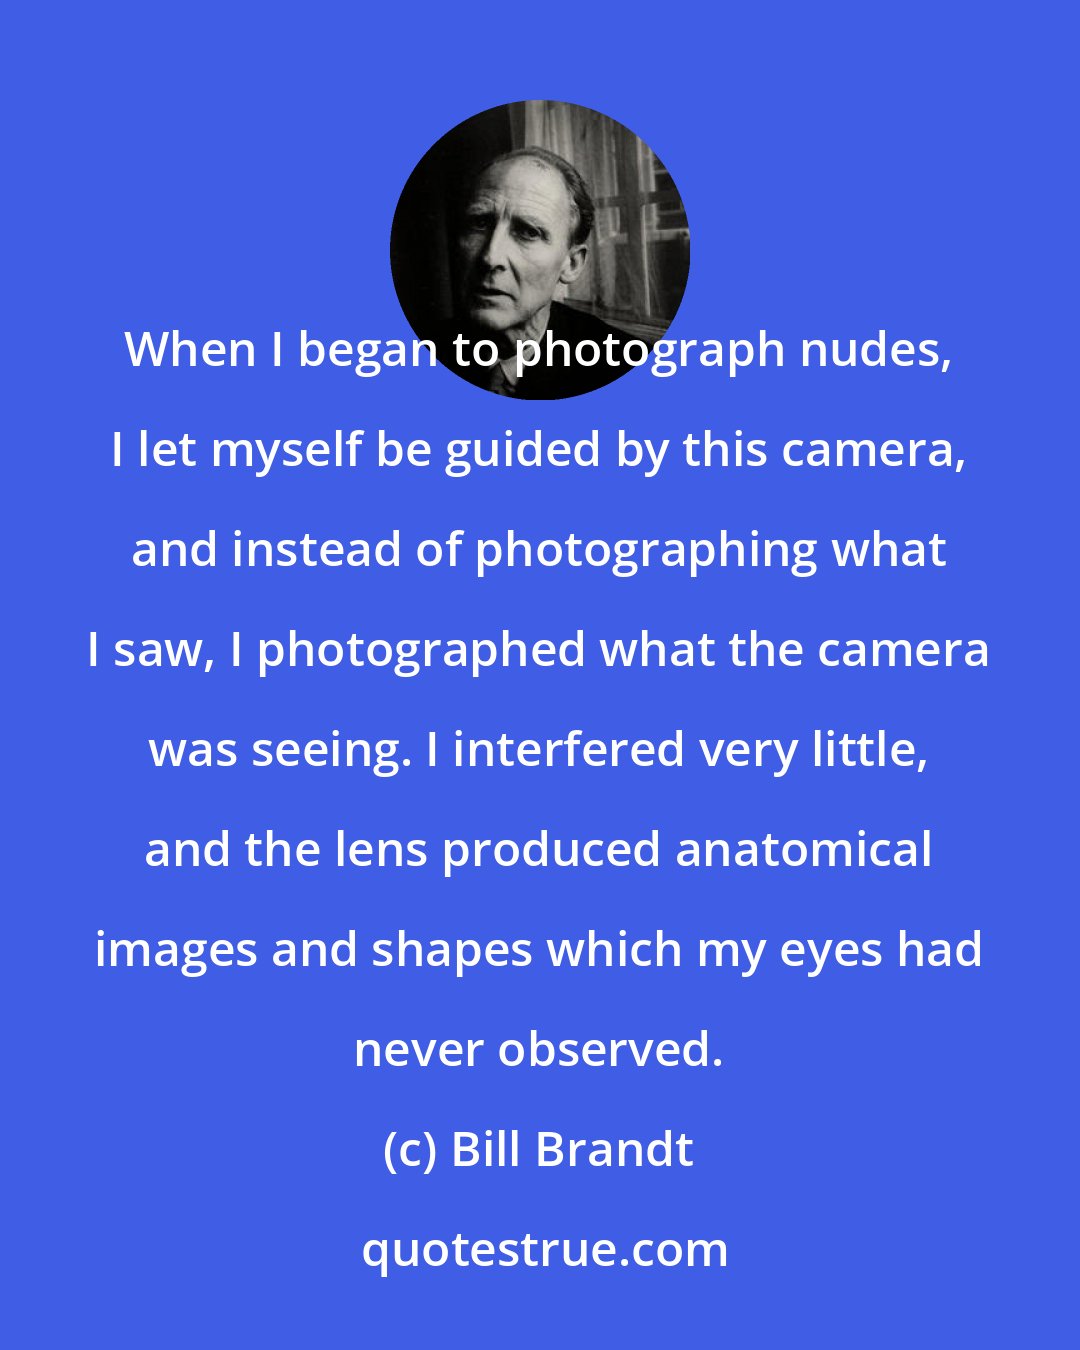 Bill Brandt: When I began to photograph nudes, I let myself be guided by this camera, and instead of photographing what I saw, I photographed what the camera was seeing. I interfered very little, and the lens produced anatomical images and shapes which my eyes had never observed.